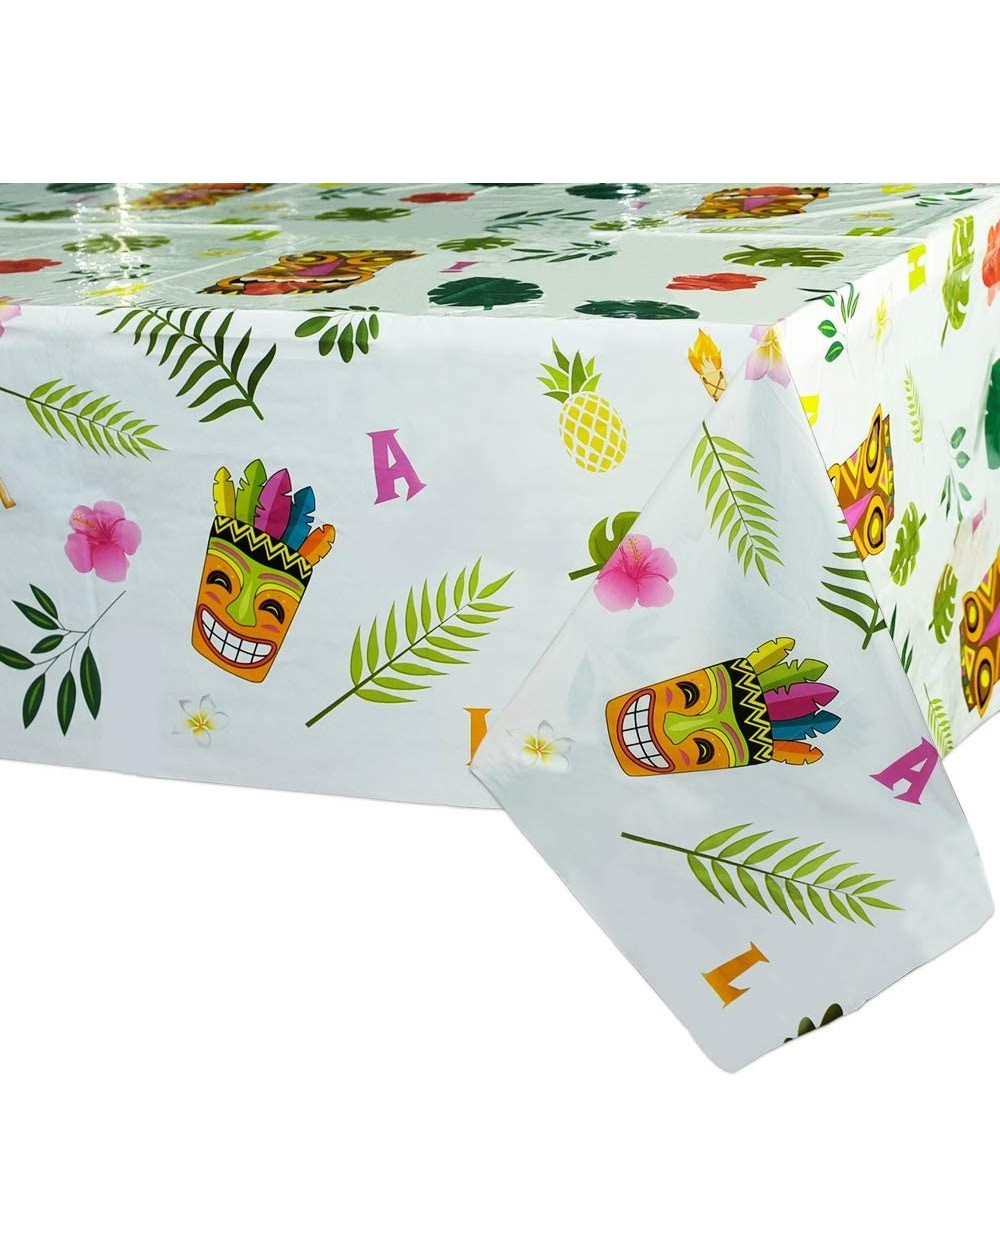 Tablecovers Hawaiian Luau Table Covers - 6 Pack 71" x 43.3" Disposable Plastic Tablecloth Aloha Tiki Party Supplies Summer Po...